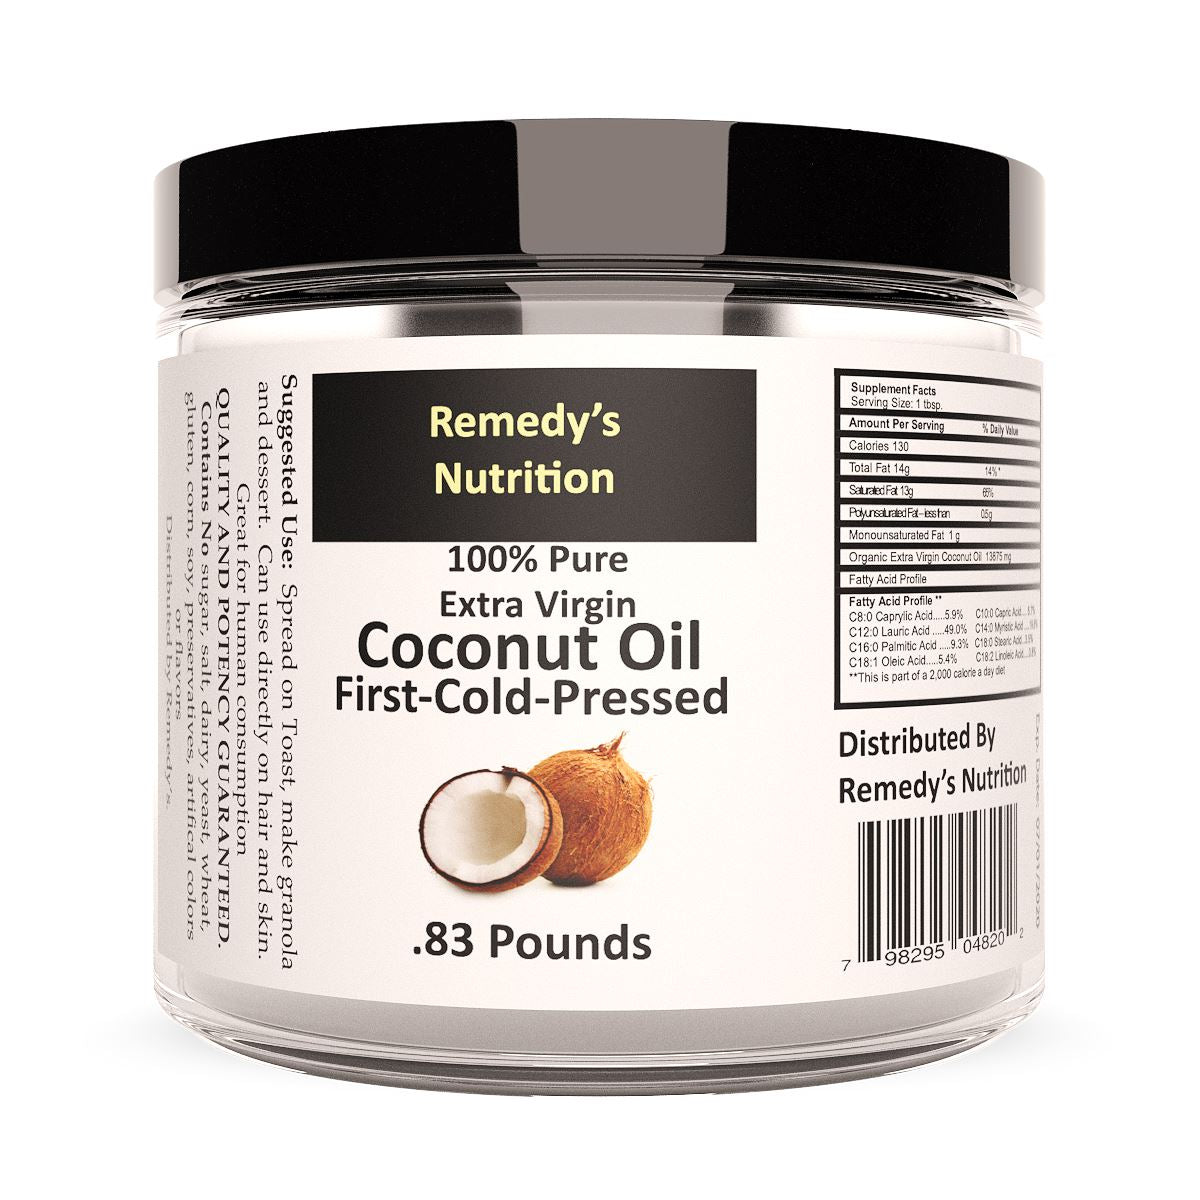 Raw Coconut Oil 16 oz (Check Supplement Facts Box for a List of Organic Ingredients) Personal Care Remedy's Nutrition 